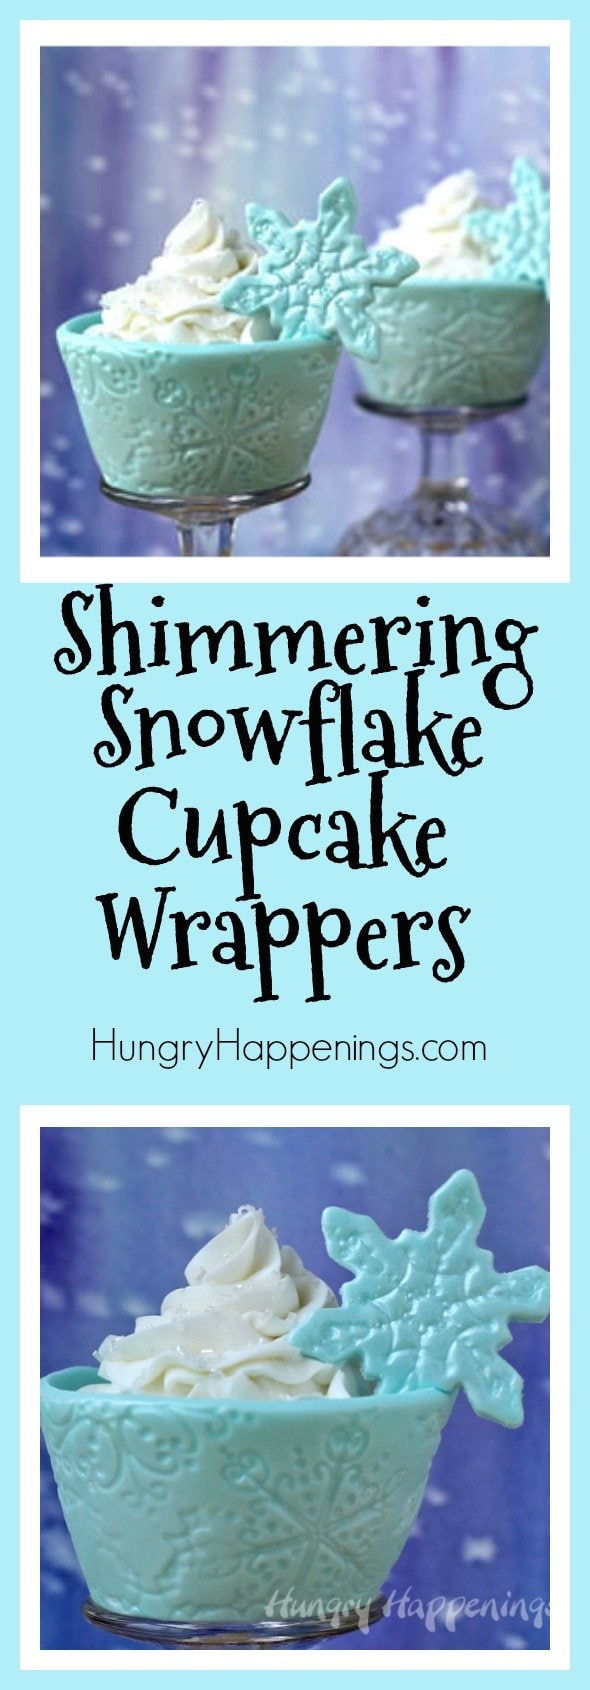 Add a little extra pizazz to your holiday cupcakes and make them look like you just picked them up from being in the snow. These Shimmering Snowflake Cupcake Wrappers will cool off these delicious hot desserts.